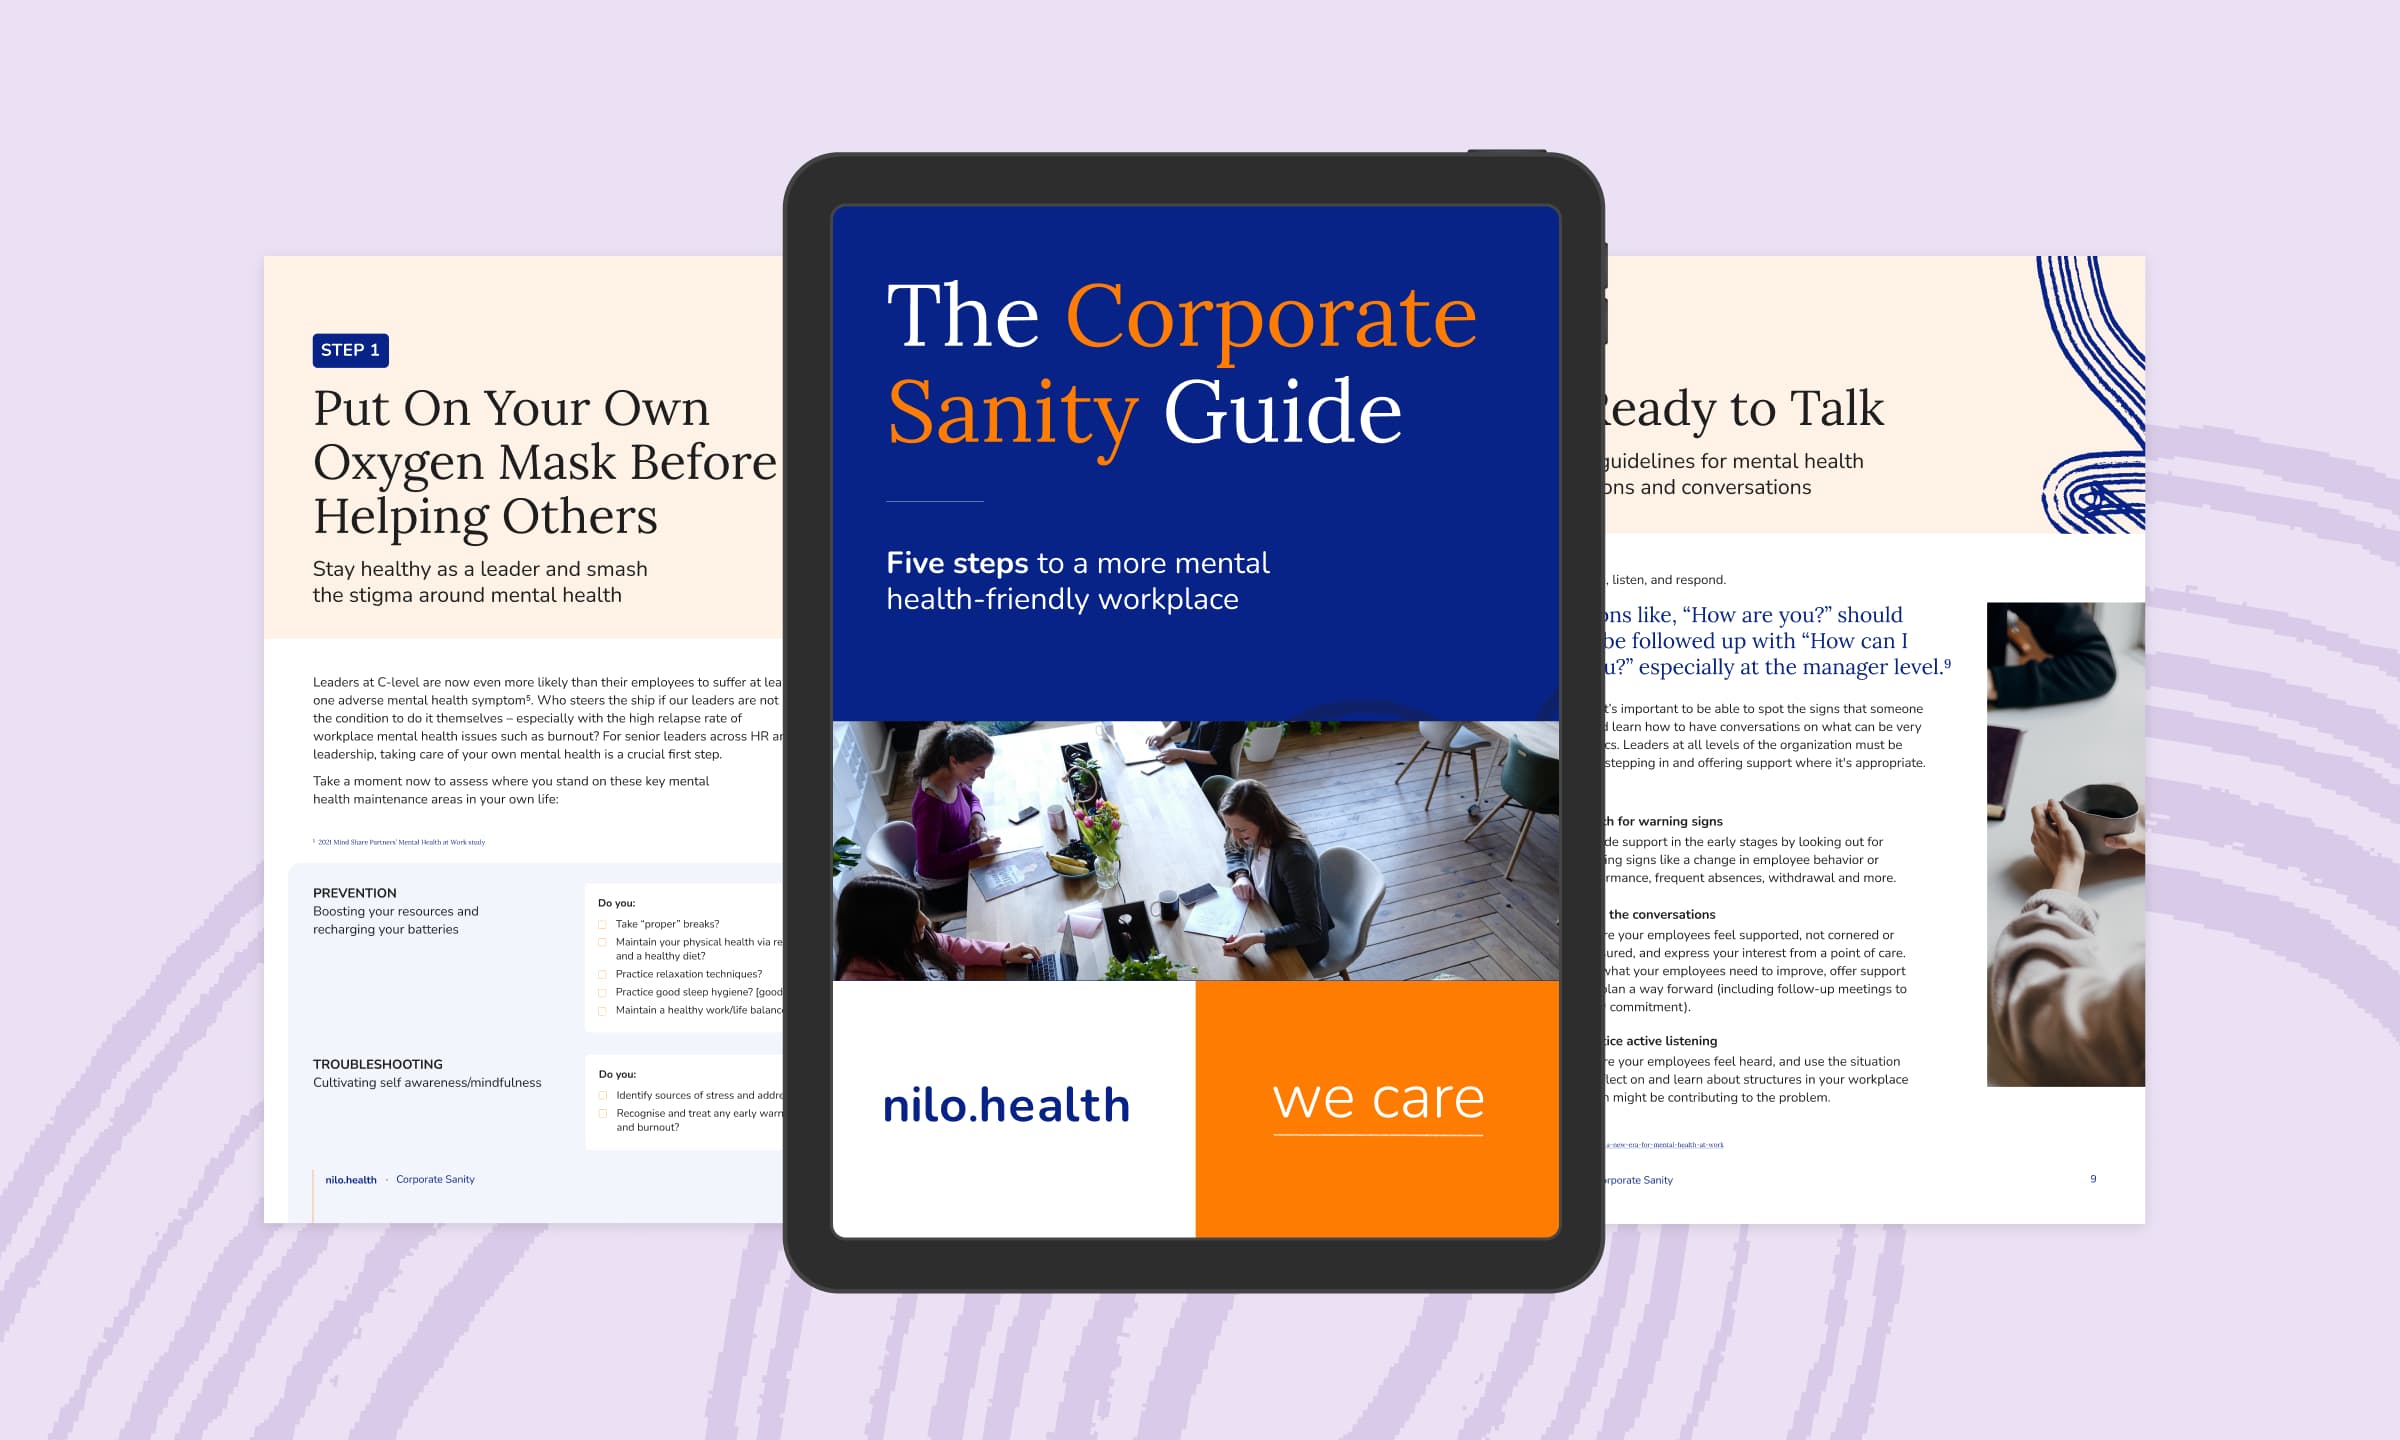 The Corporate Sanity Guide